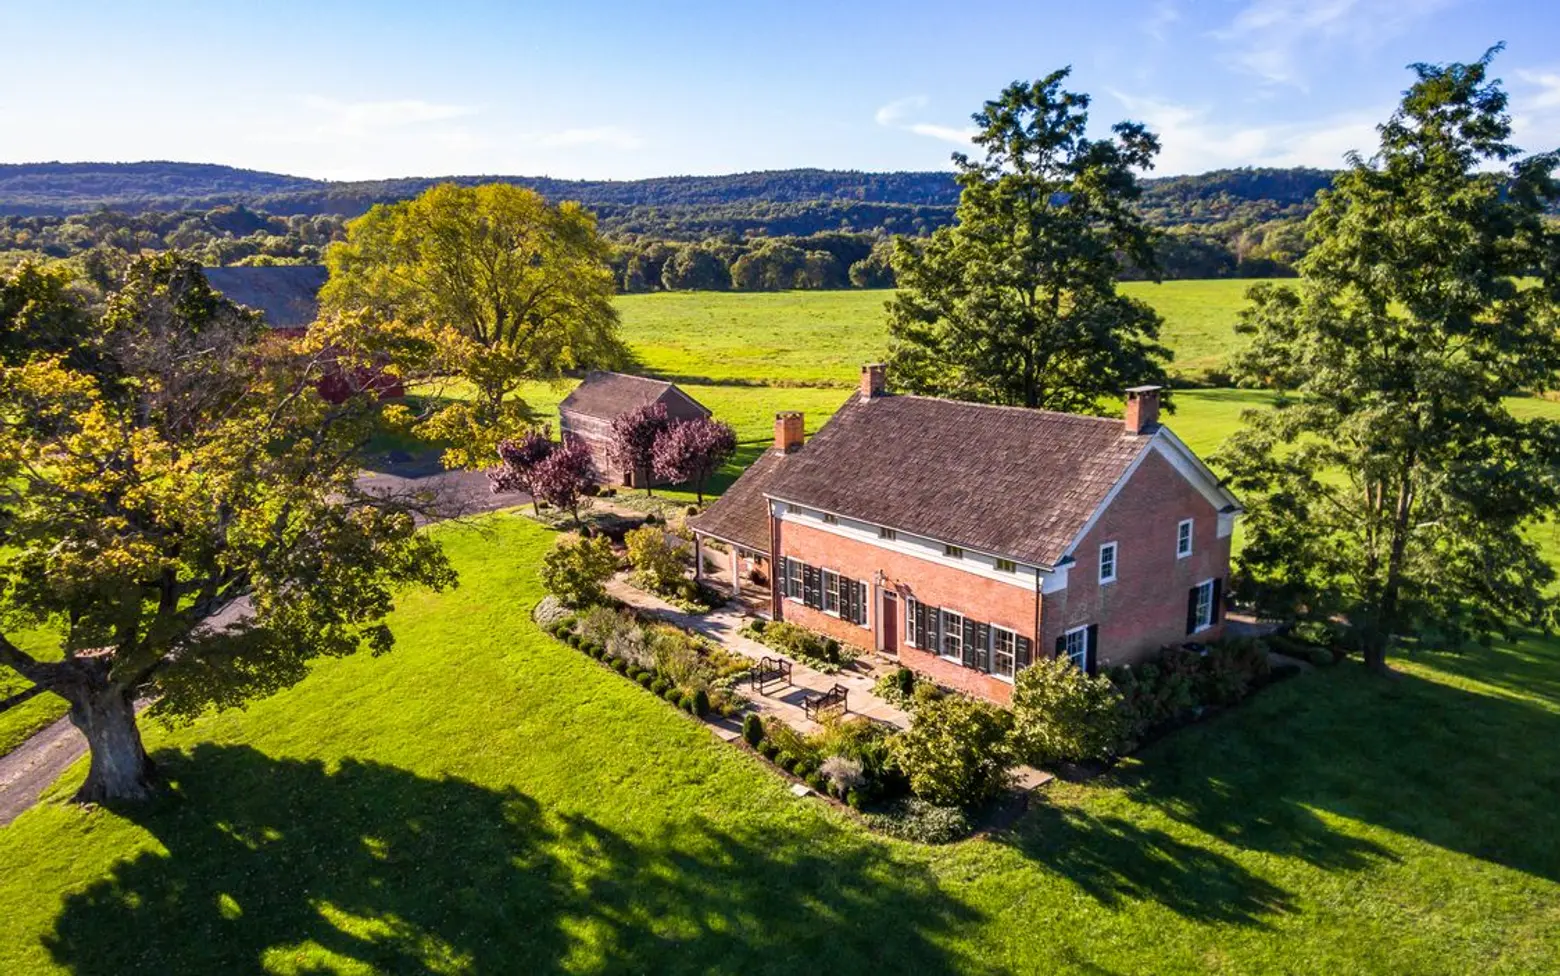 1820s New Paltz estate on 240 acres is a country living fantasy for $3M